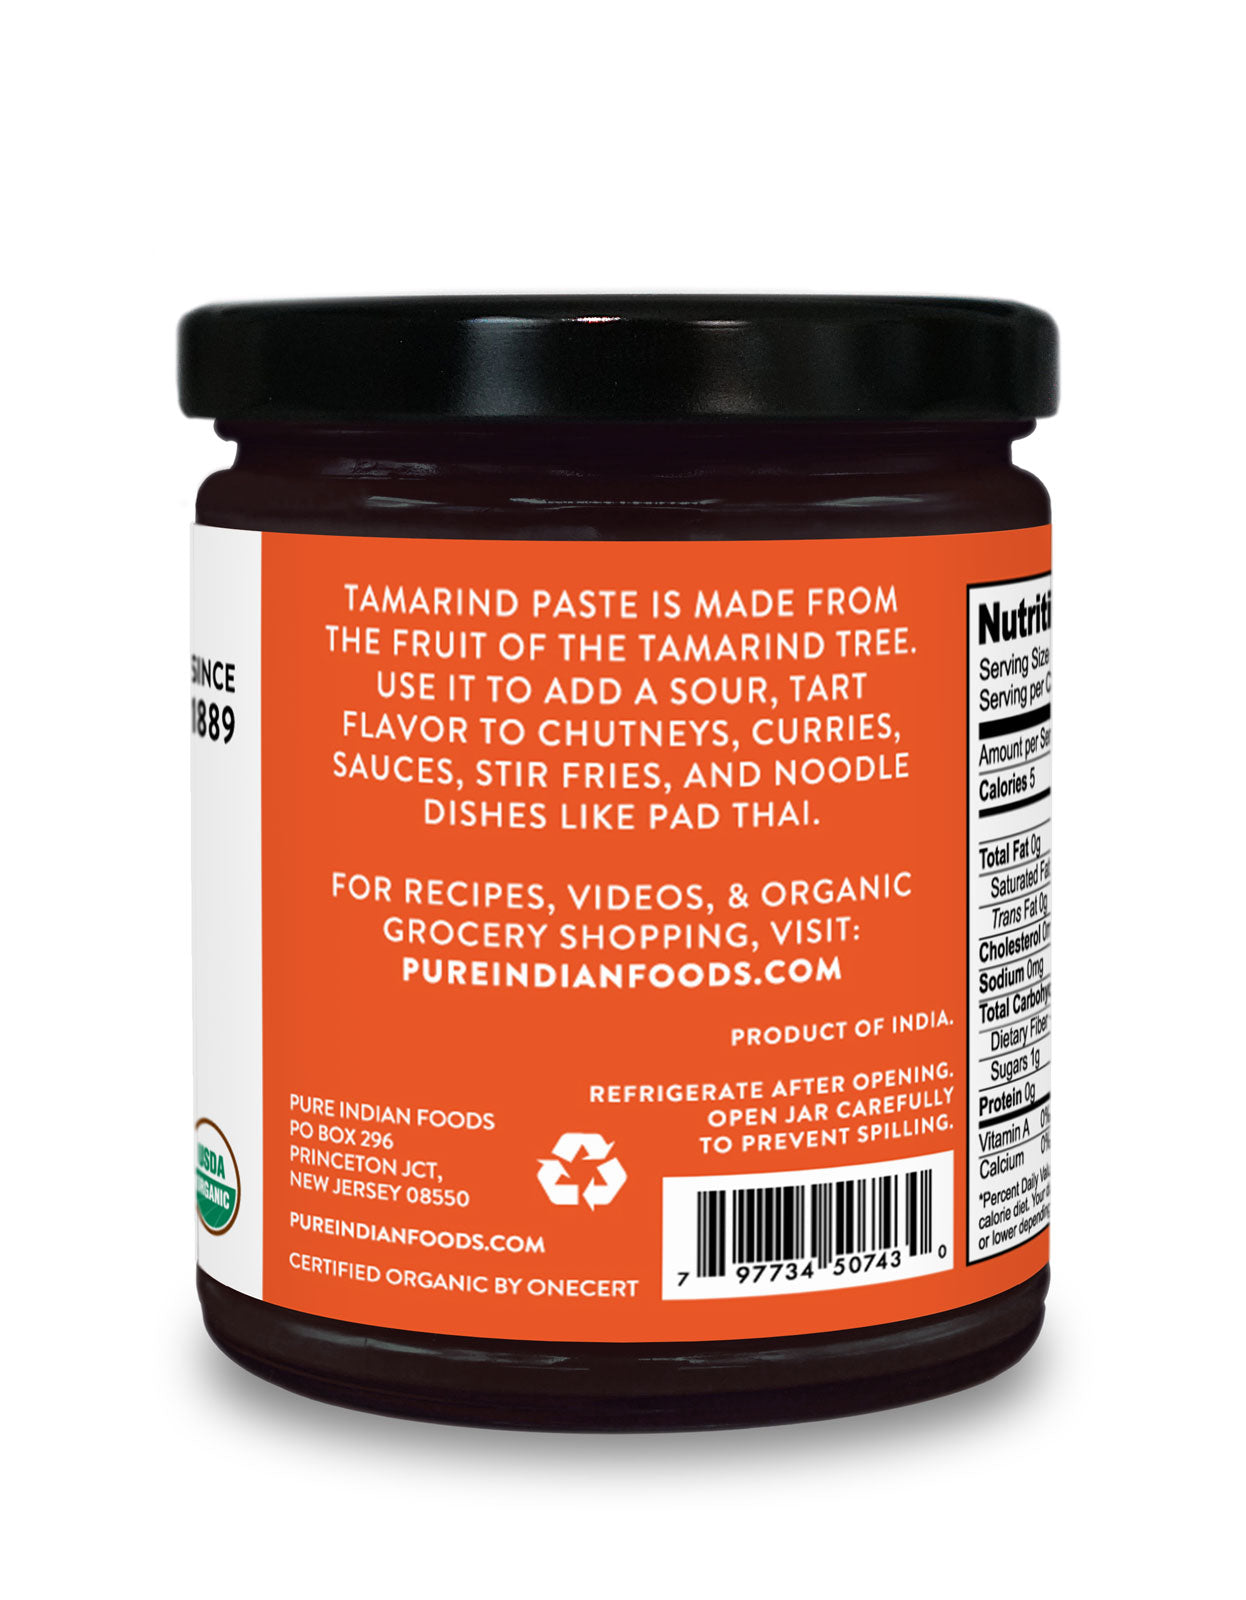 Side label on a jar of organic tamarind concentrate from Pure Indian Foods saying that tamarind paste is made from the fruit of the Tamarind tree and can be used to add a sour, tart flavor to chutneys, curries, sauces, stir fries, and noodle dishes like pad Thai.